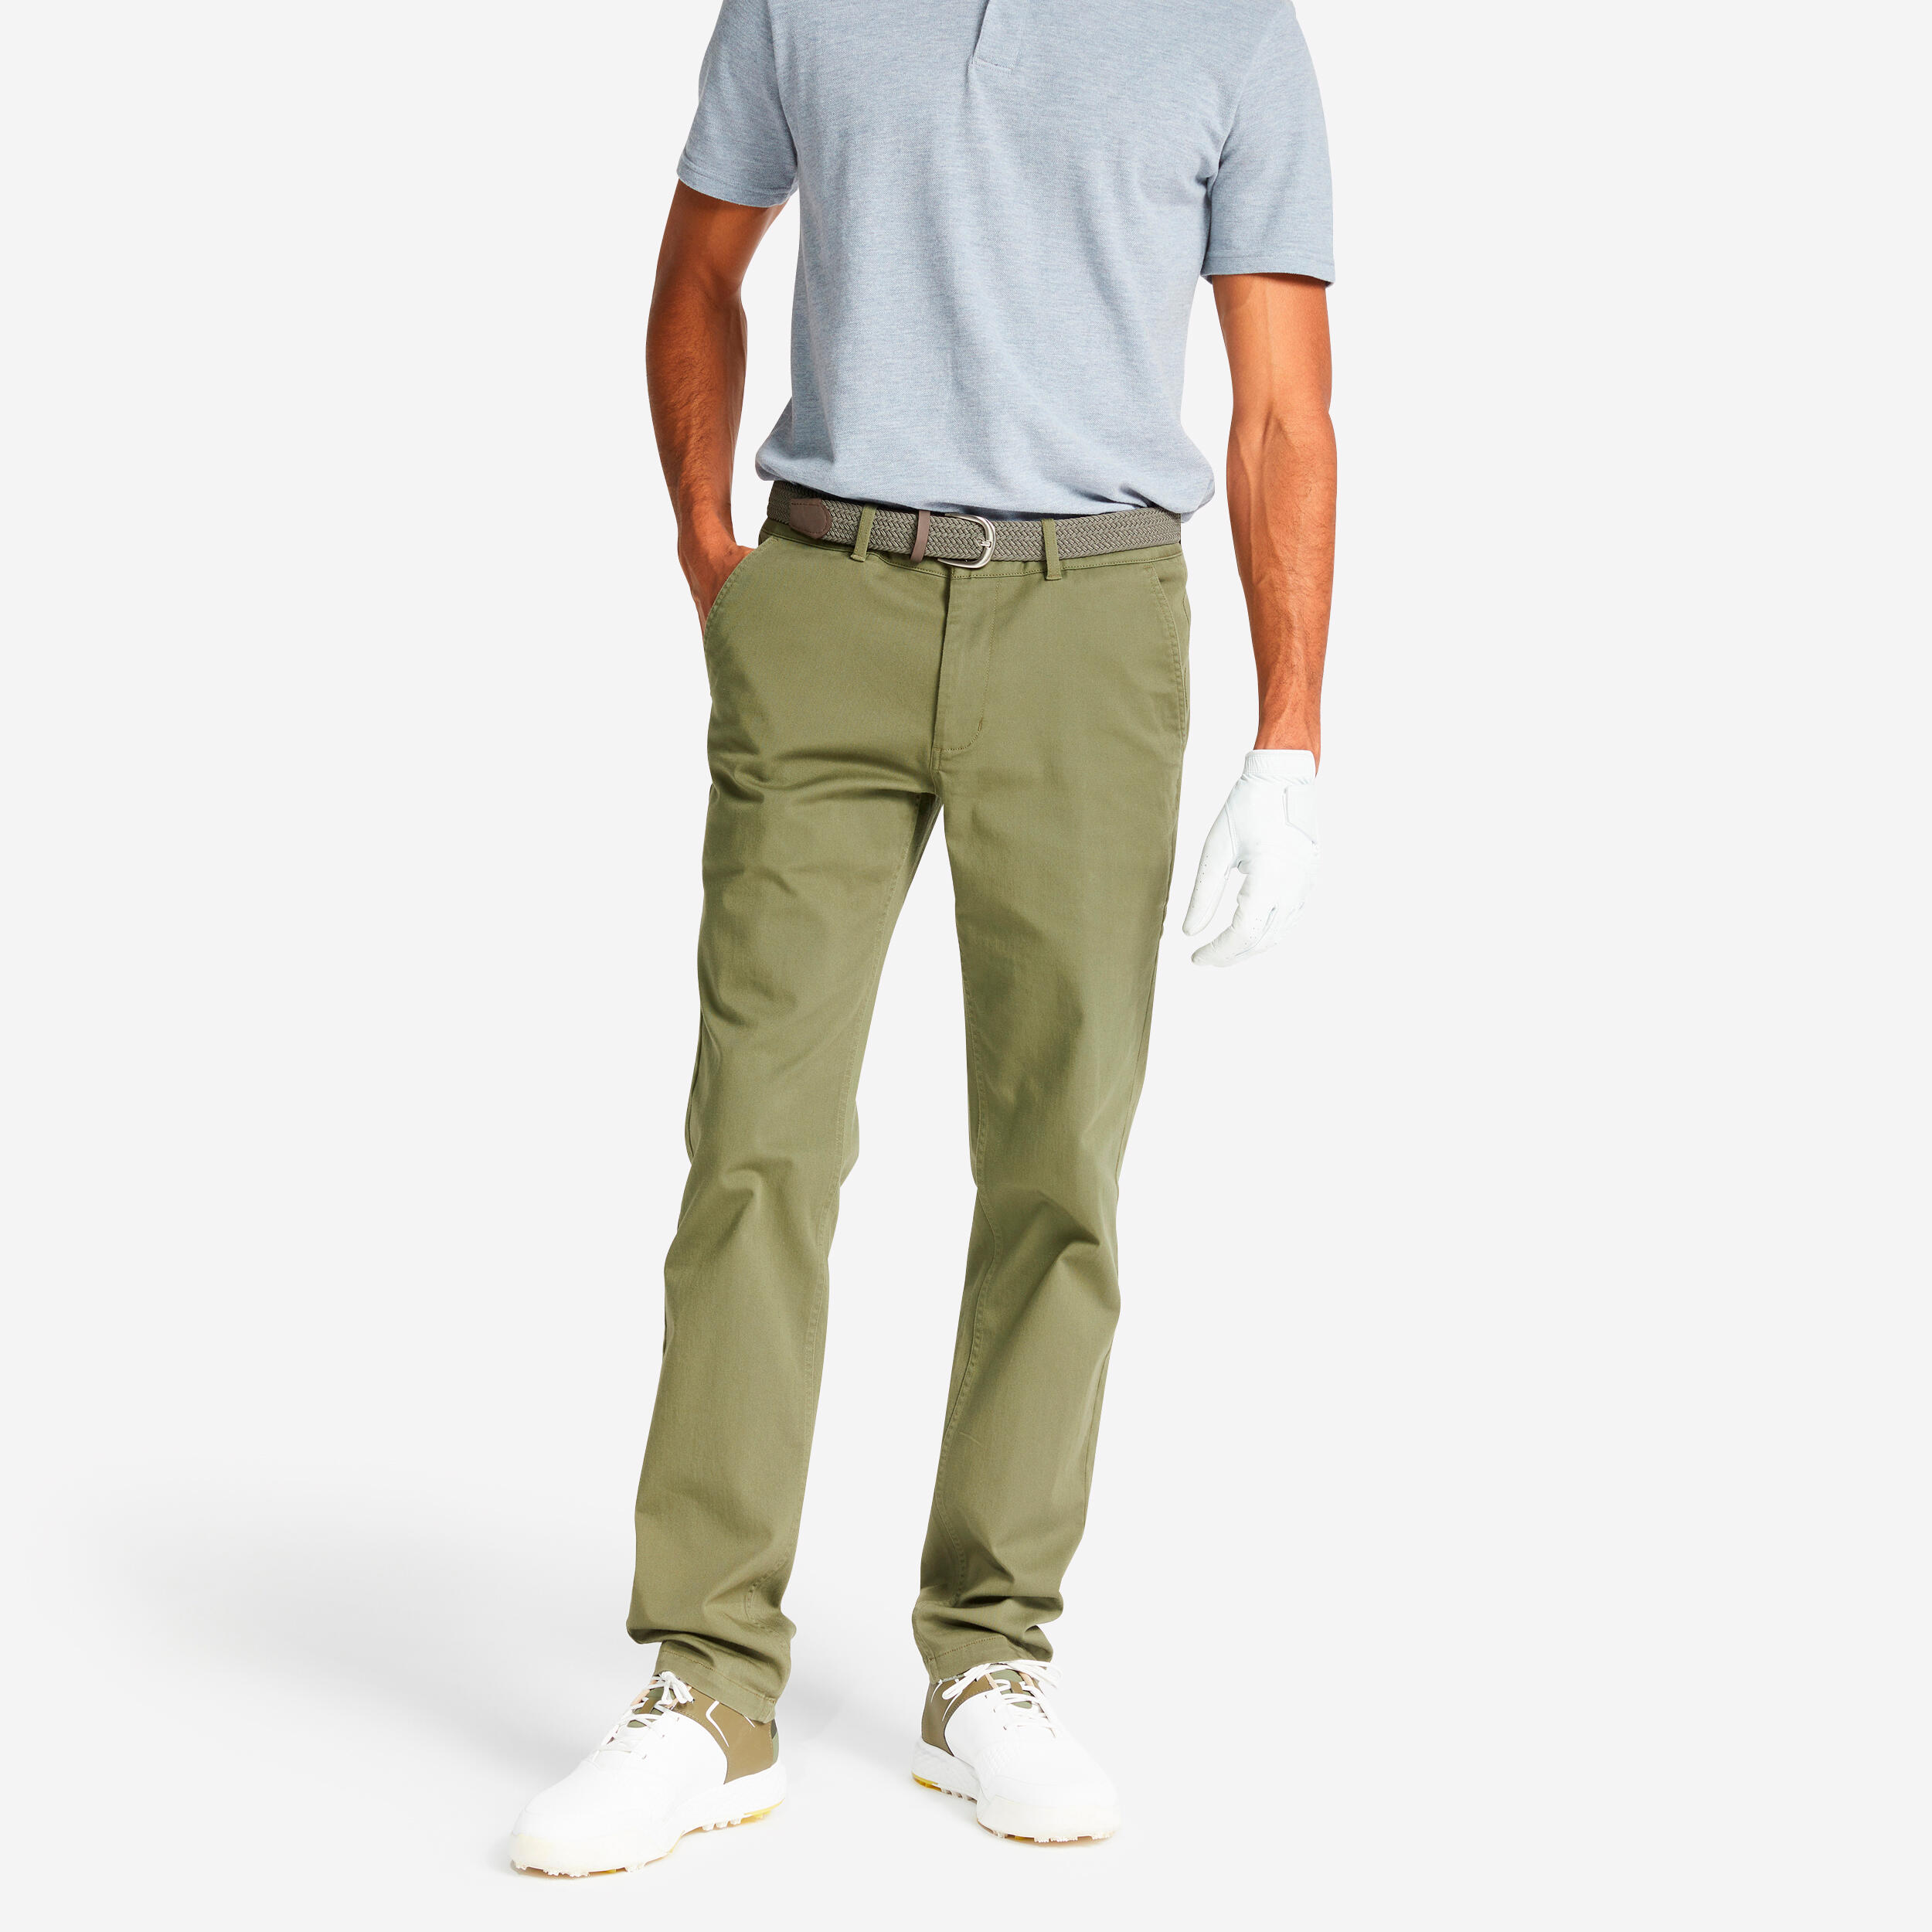 Its Friday Bring Out The Casual Look With A Checkered Shirt  Khaki Pants